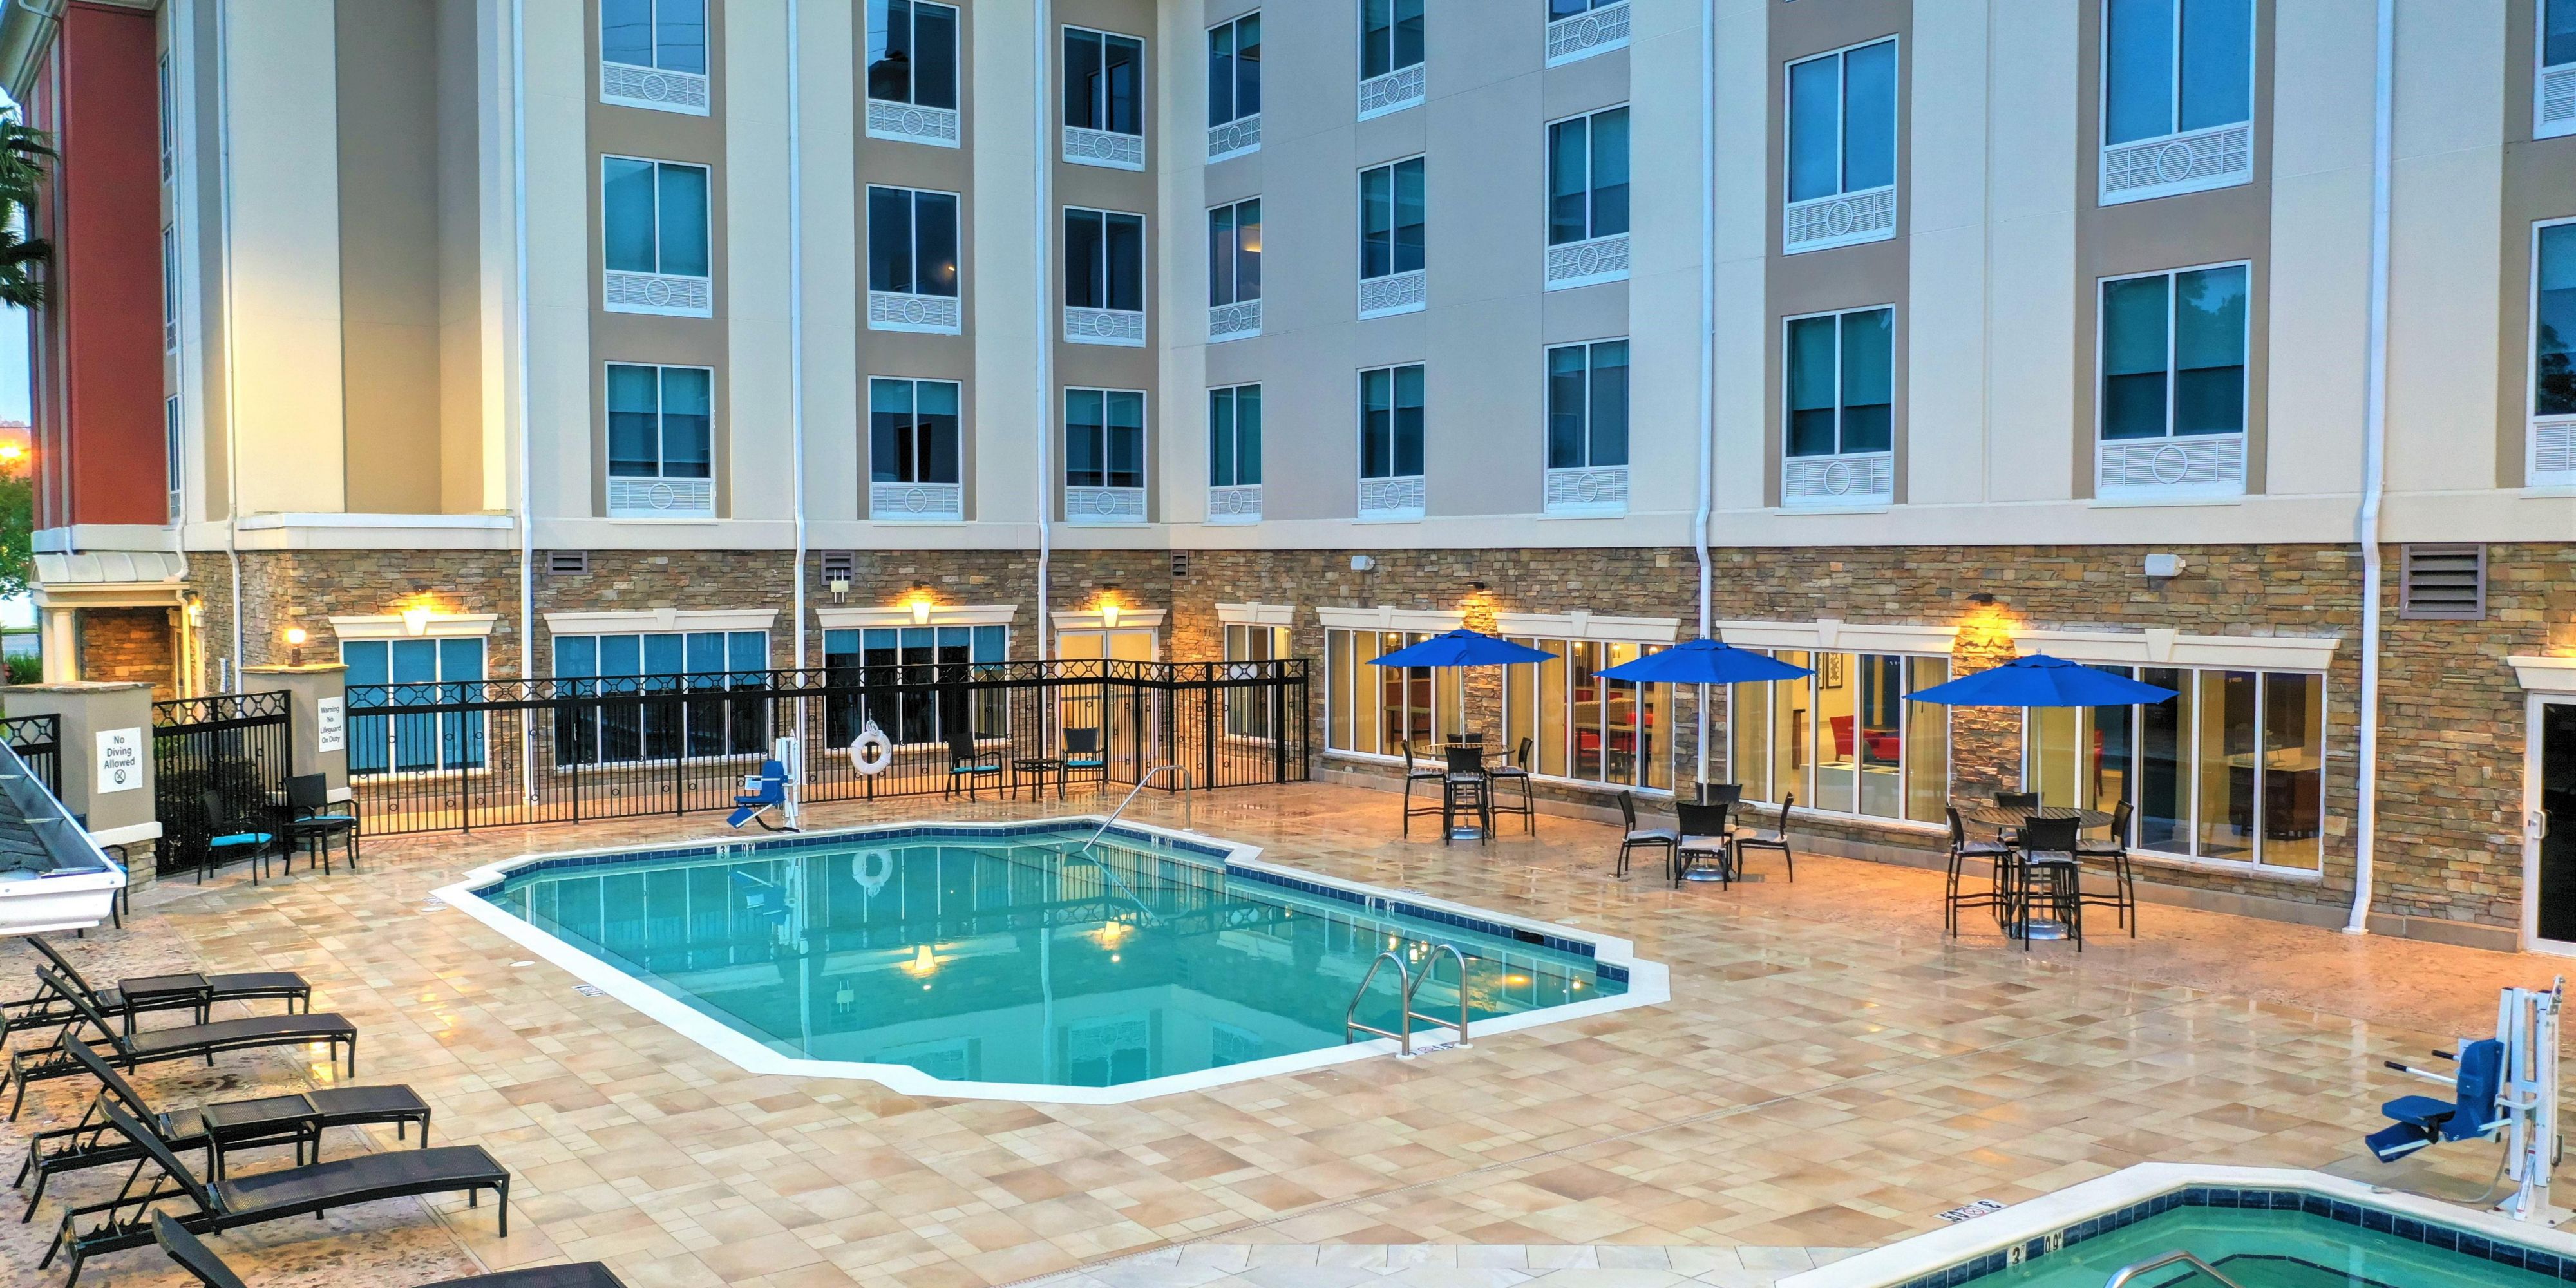 No stay at the Holiday Inn Express and Suites Saraland would be complete without going for a dip in our swimming pool! Keep the kids entertained when you're not out exploring, or just enjoy a relaxing soak.